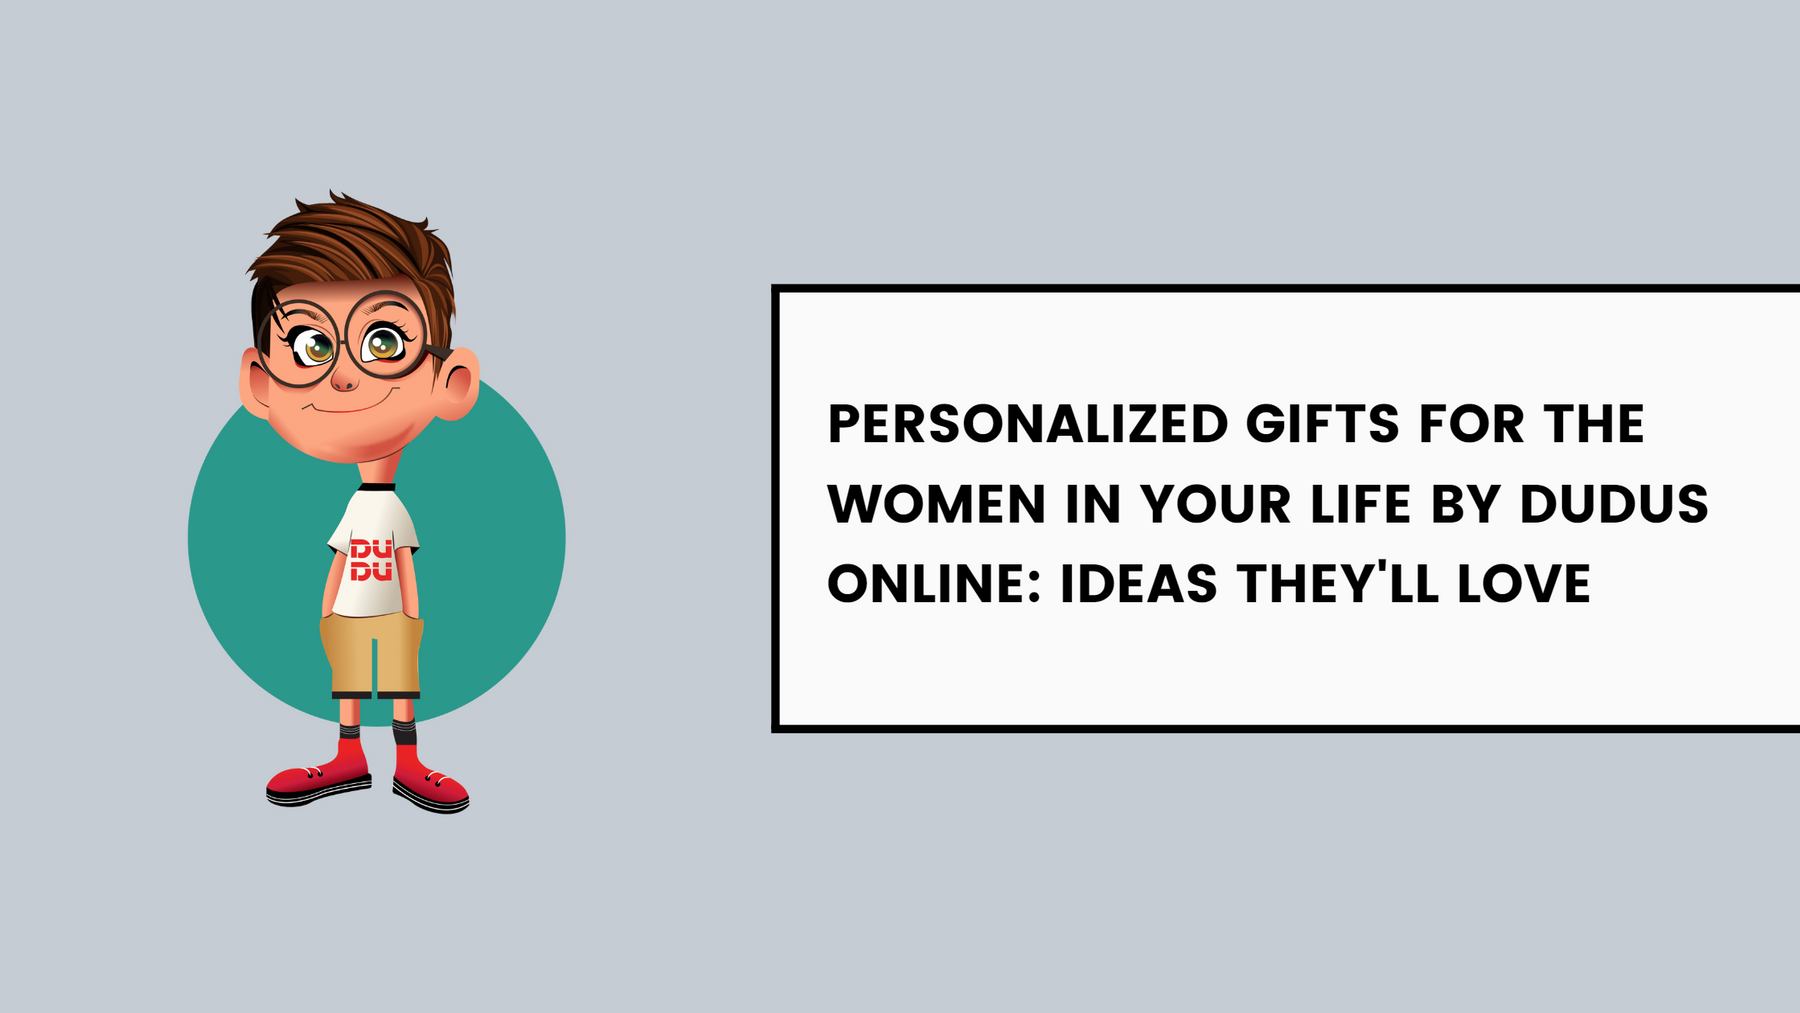 Personalized Gifts For The Women In Your Life By Dudus Online: Ideas They'll Love